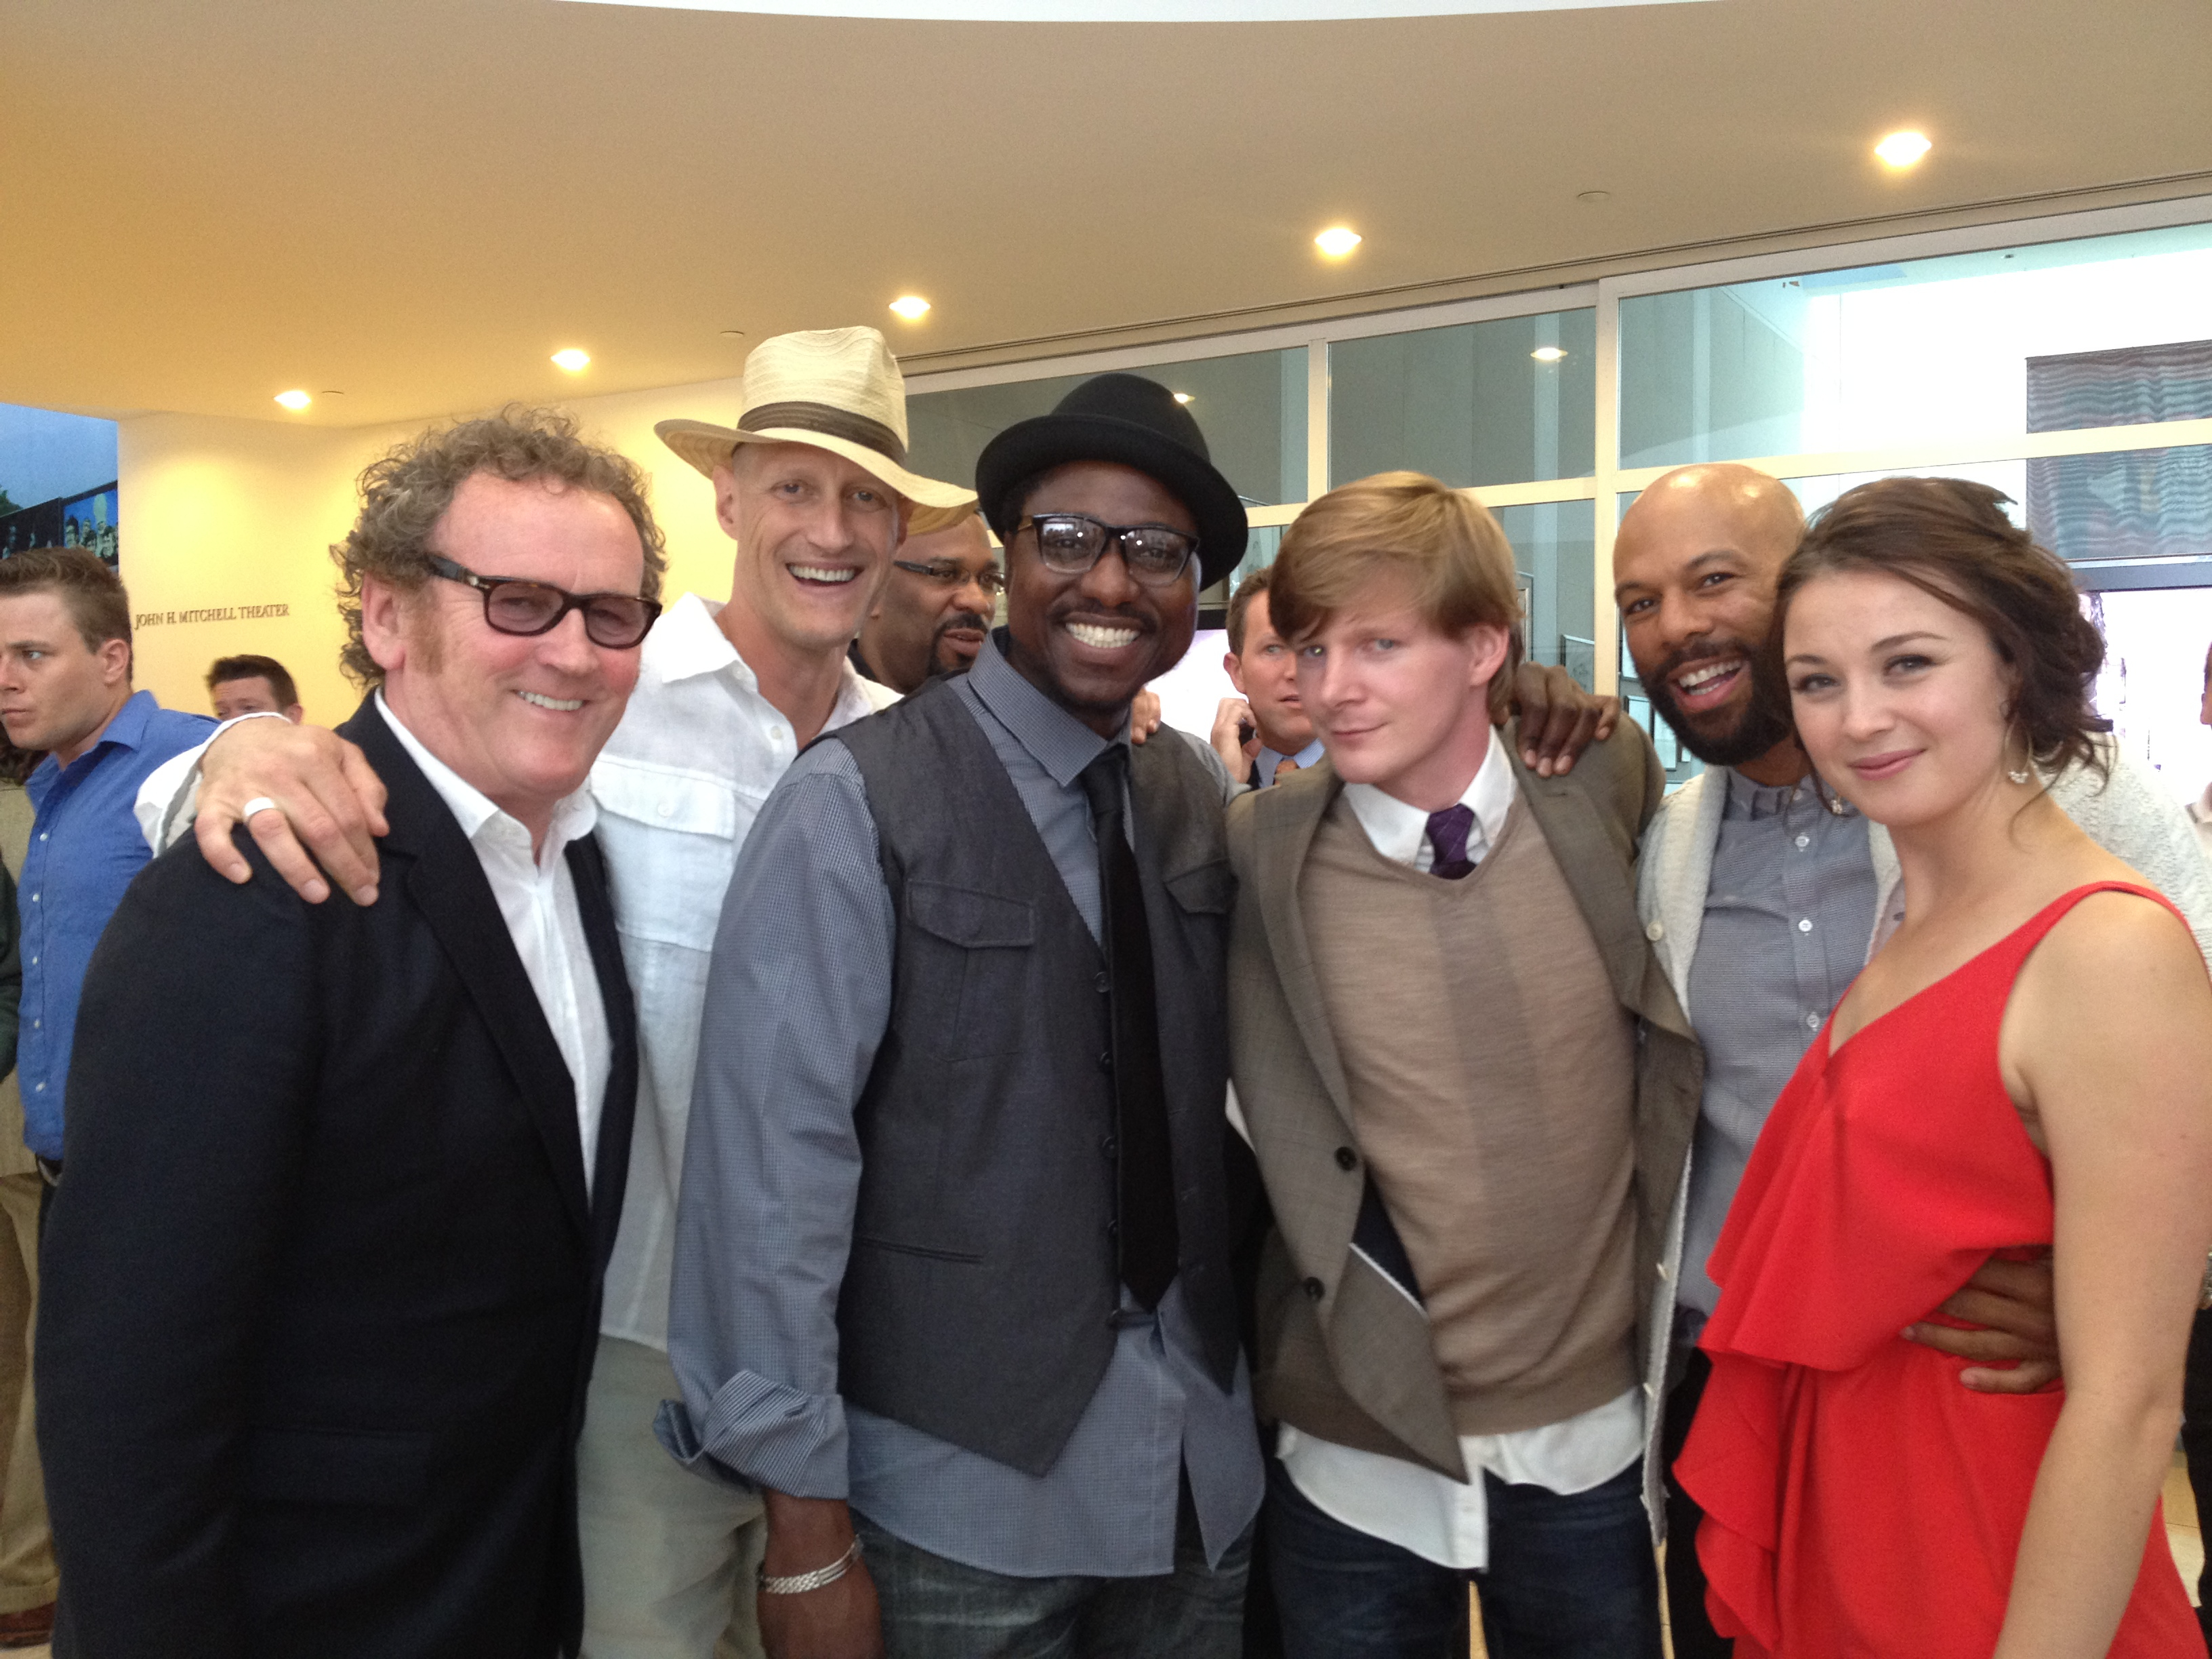 Cast of HELL ON WHEELS at Season 2 Premiere: Colm Meaney, Christopher Heyerdahl, Dohn Norwood, Ben Esler, Common, Robin McLeavy - The Paley Center for Media, Beverly Hills, CA 2012.